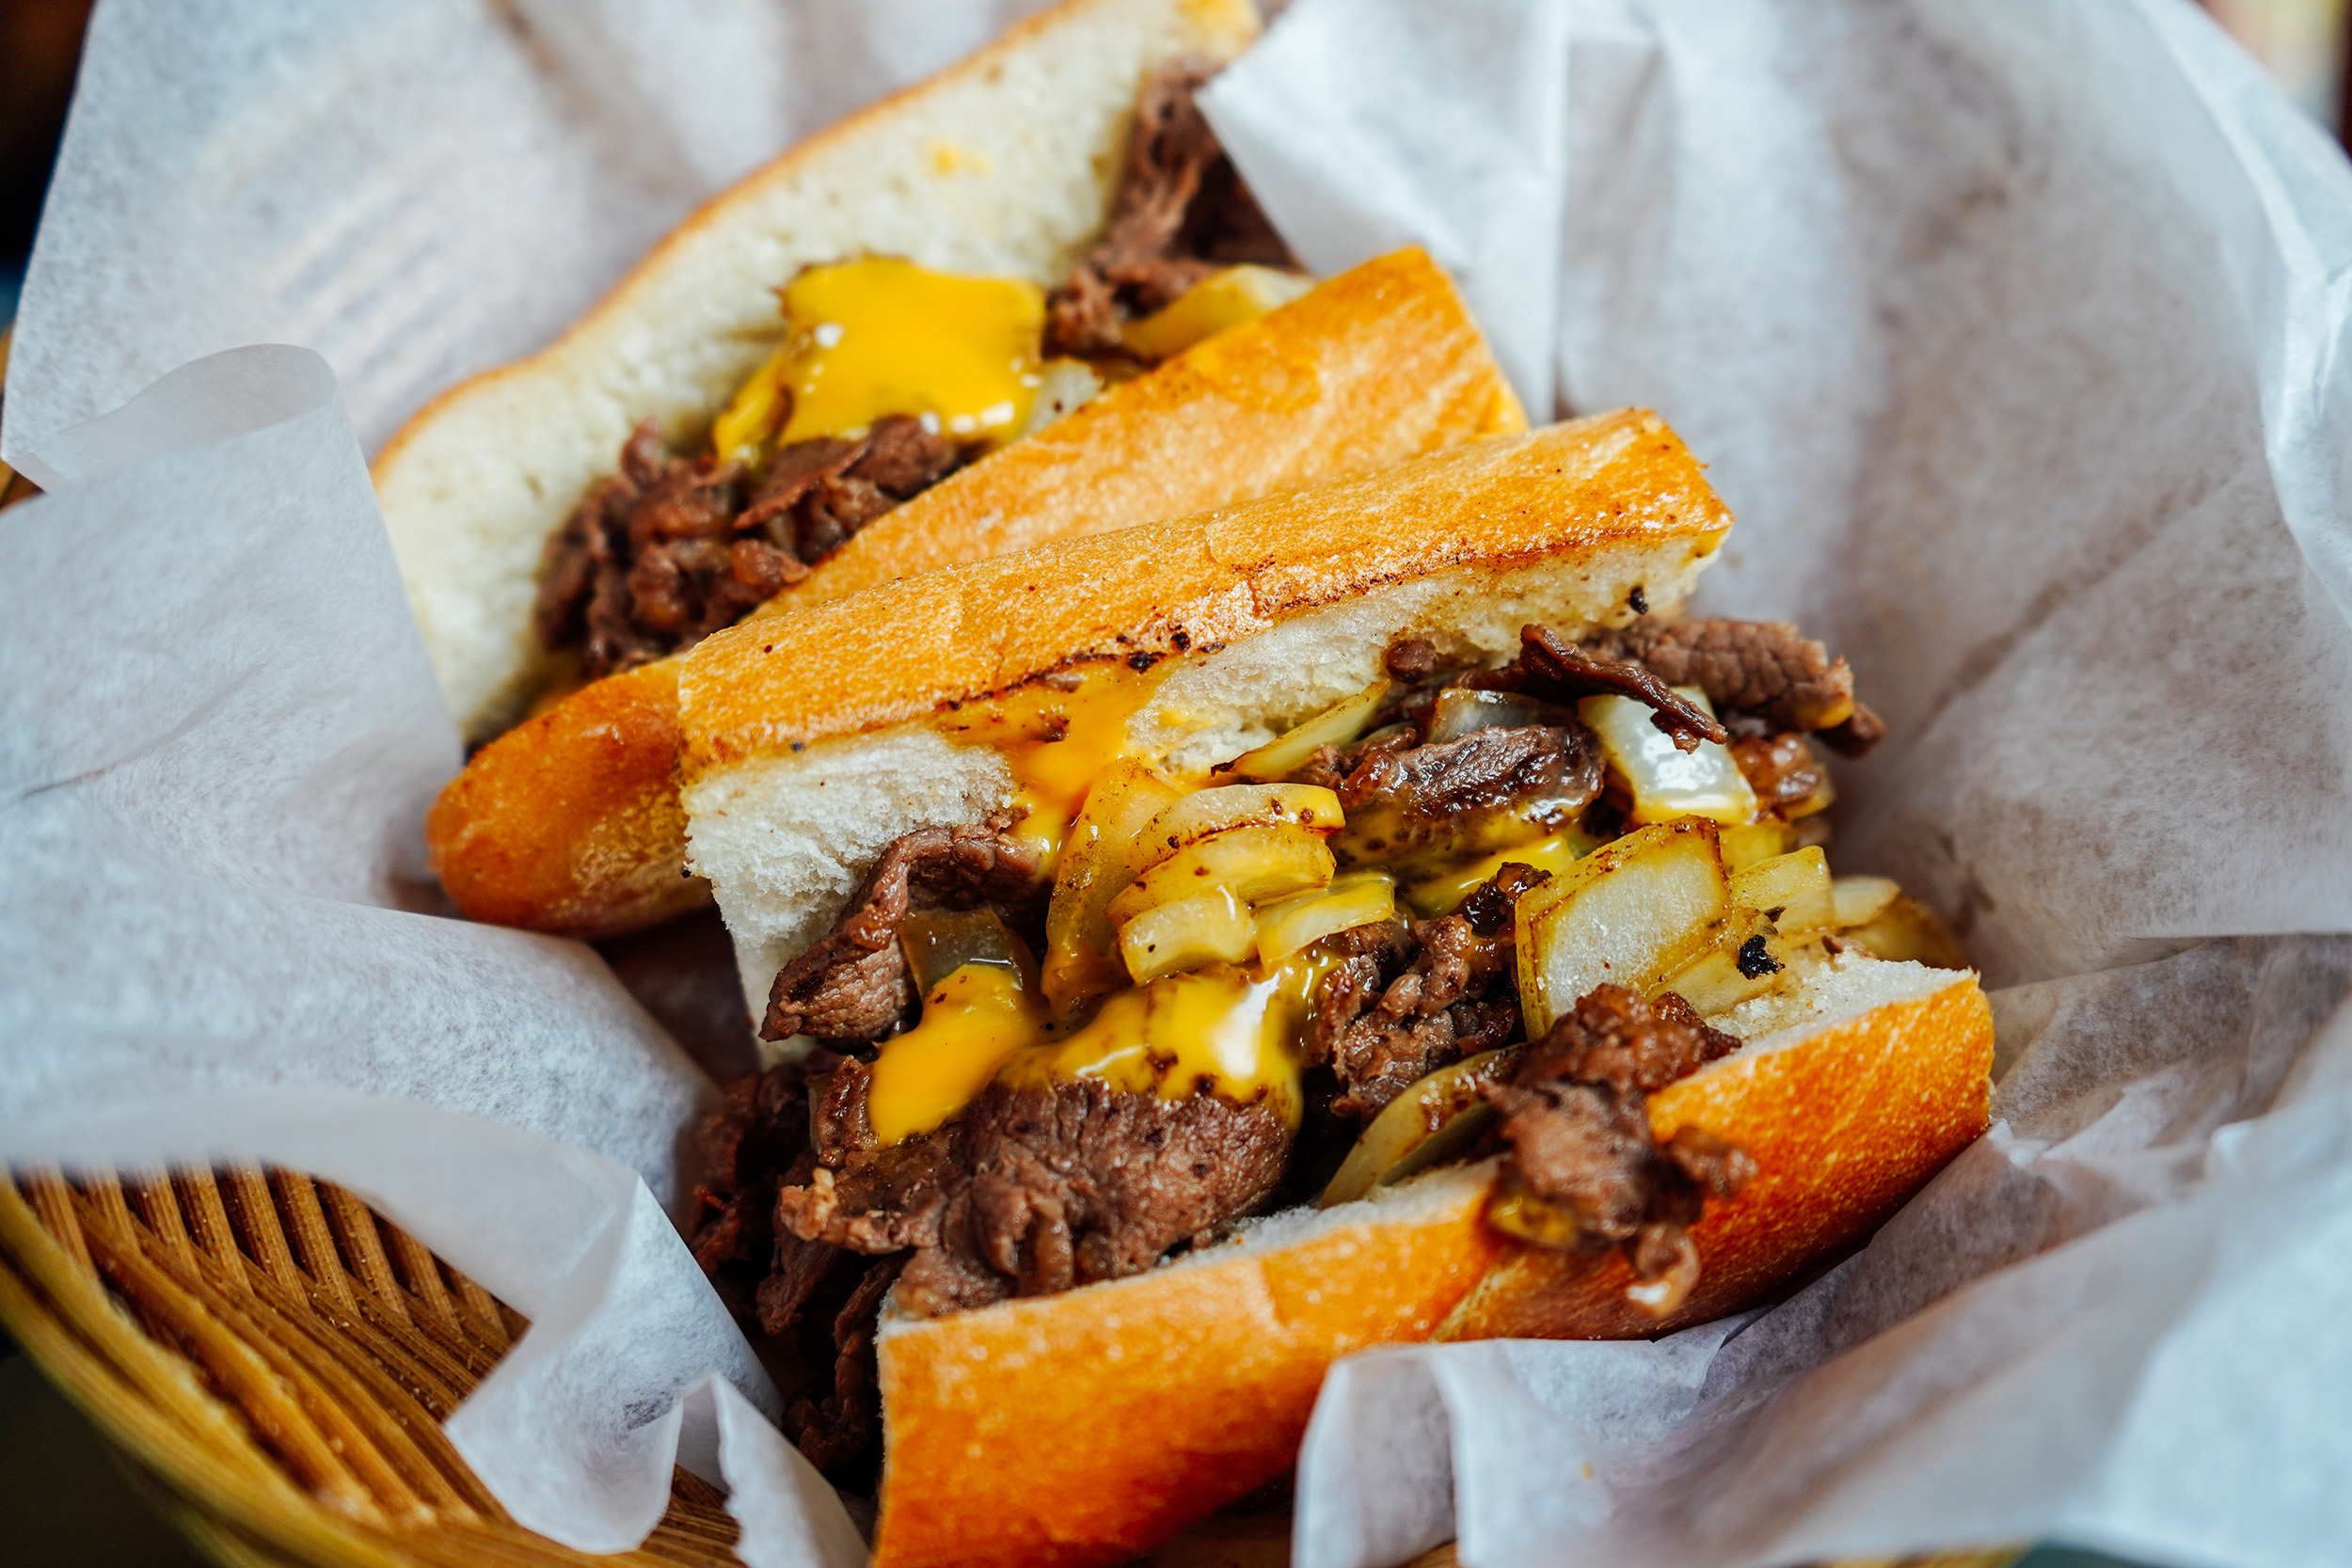 A cheesesteak is served in a basket.